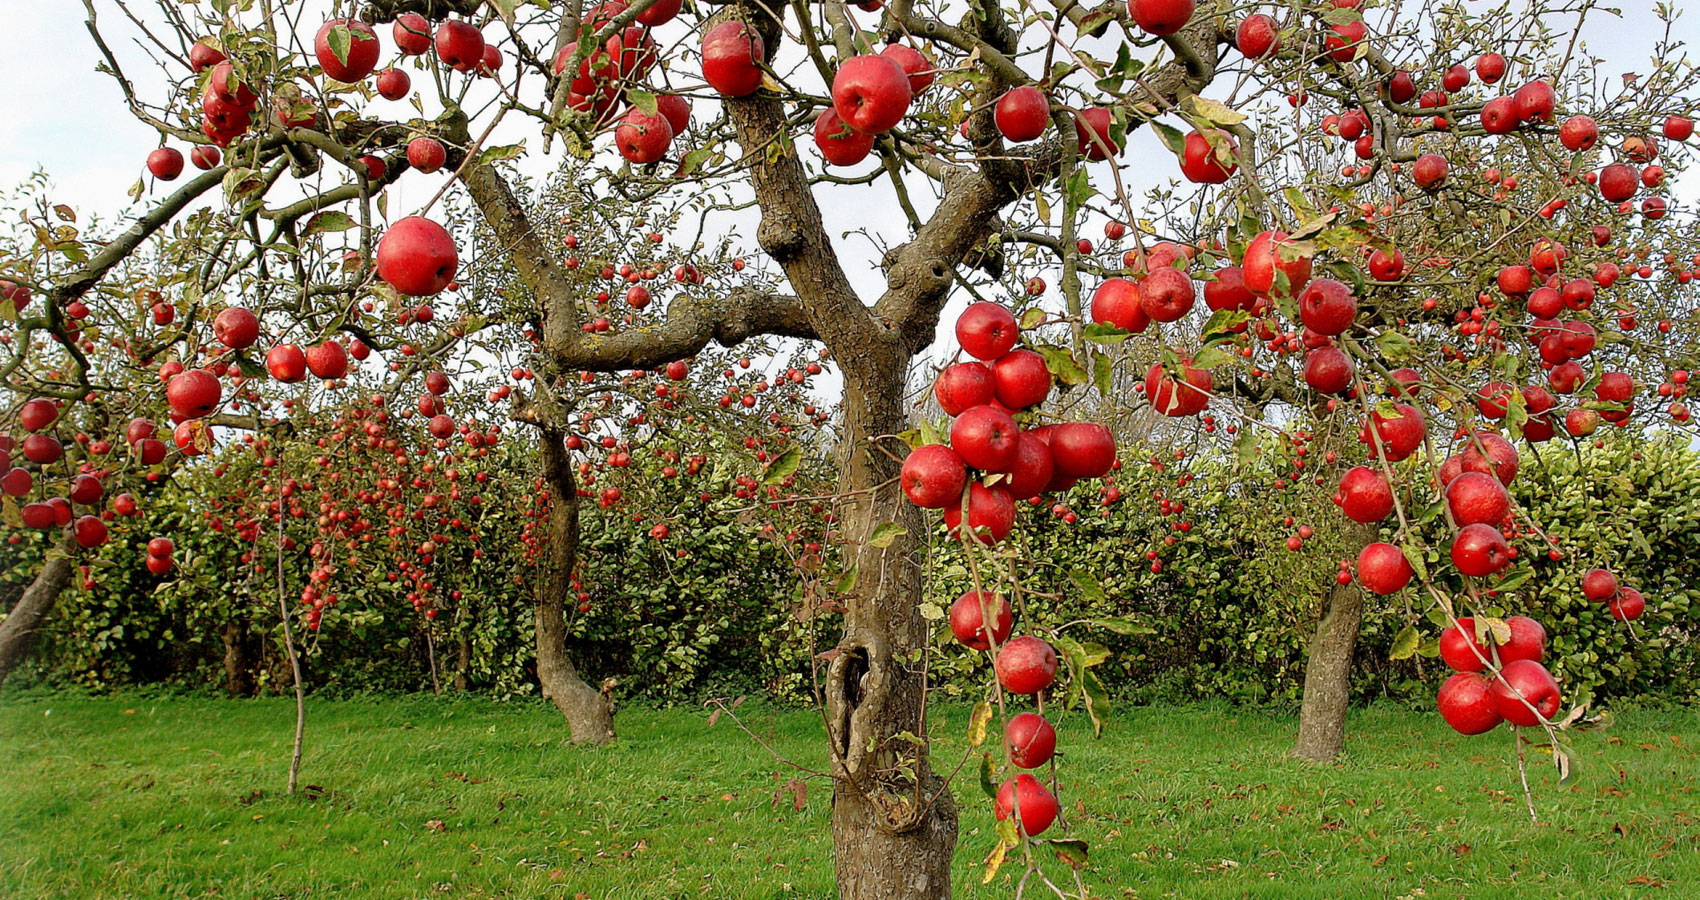 Isle Of Apples, by Phillip Dodd at Spillwords.com